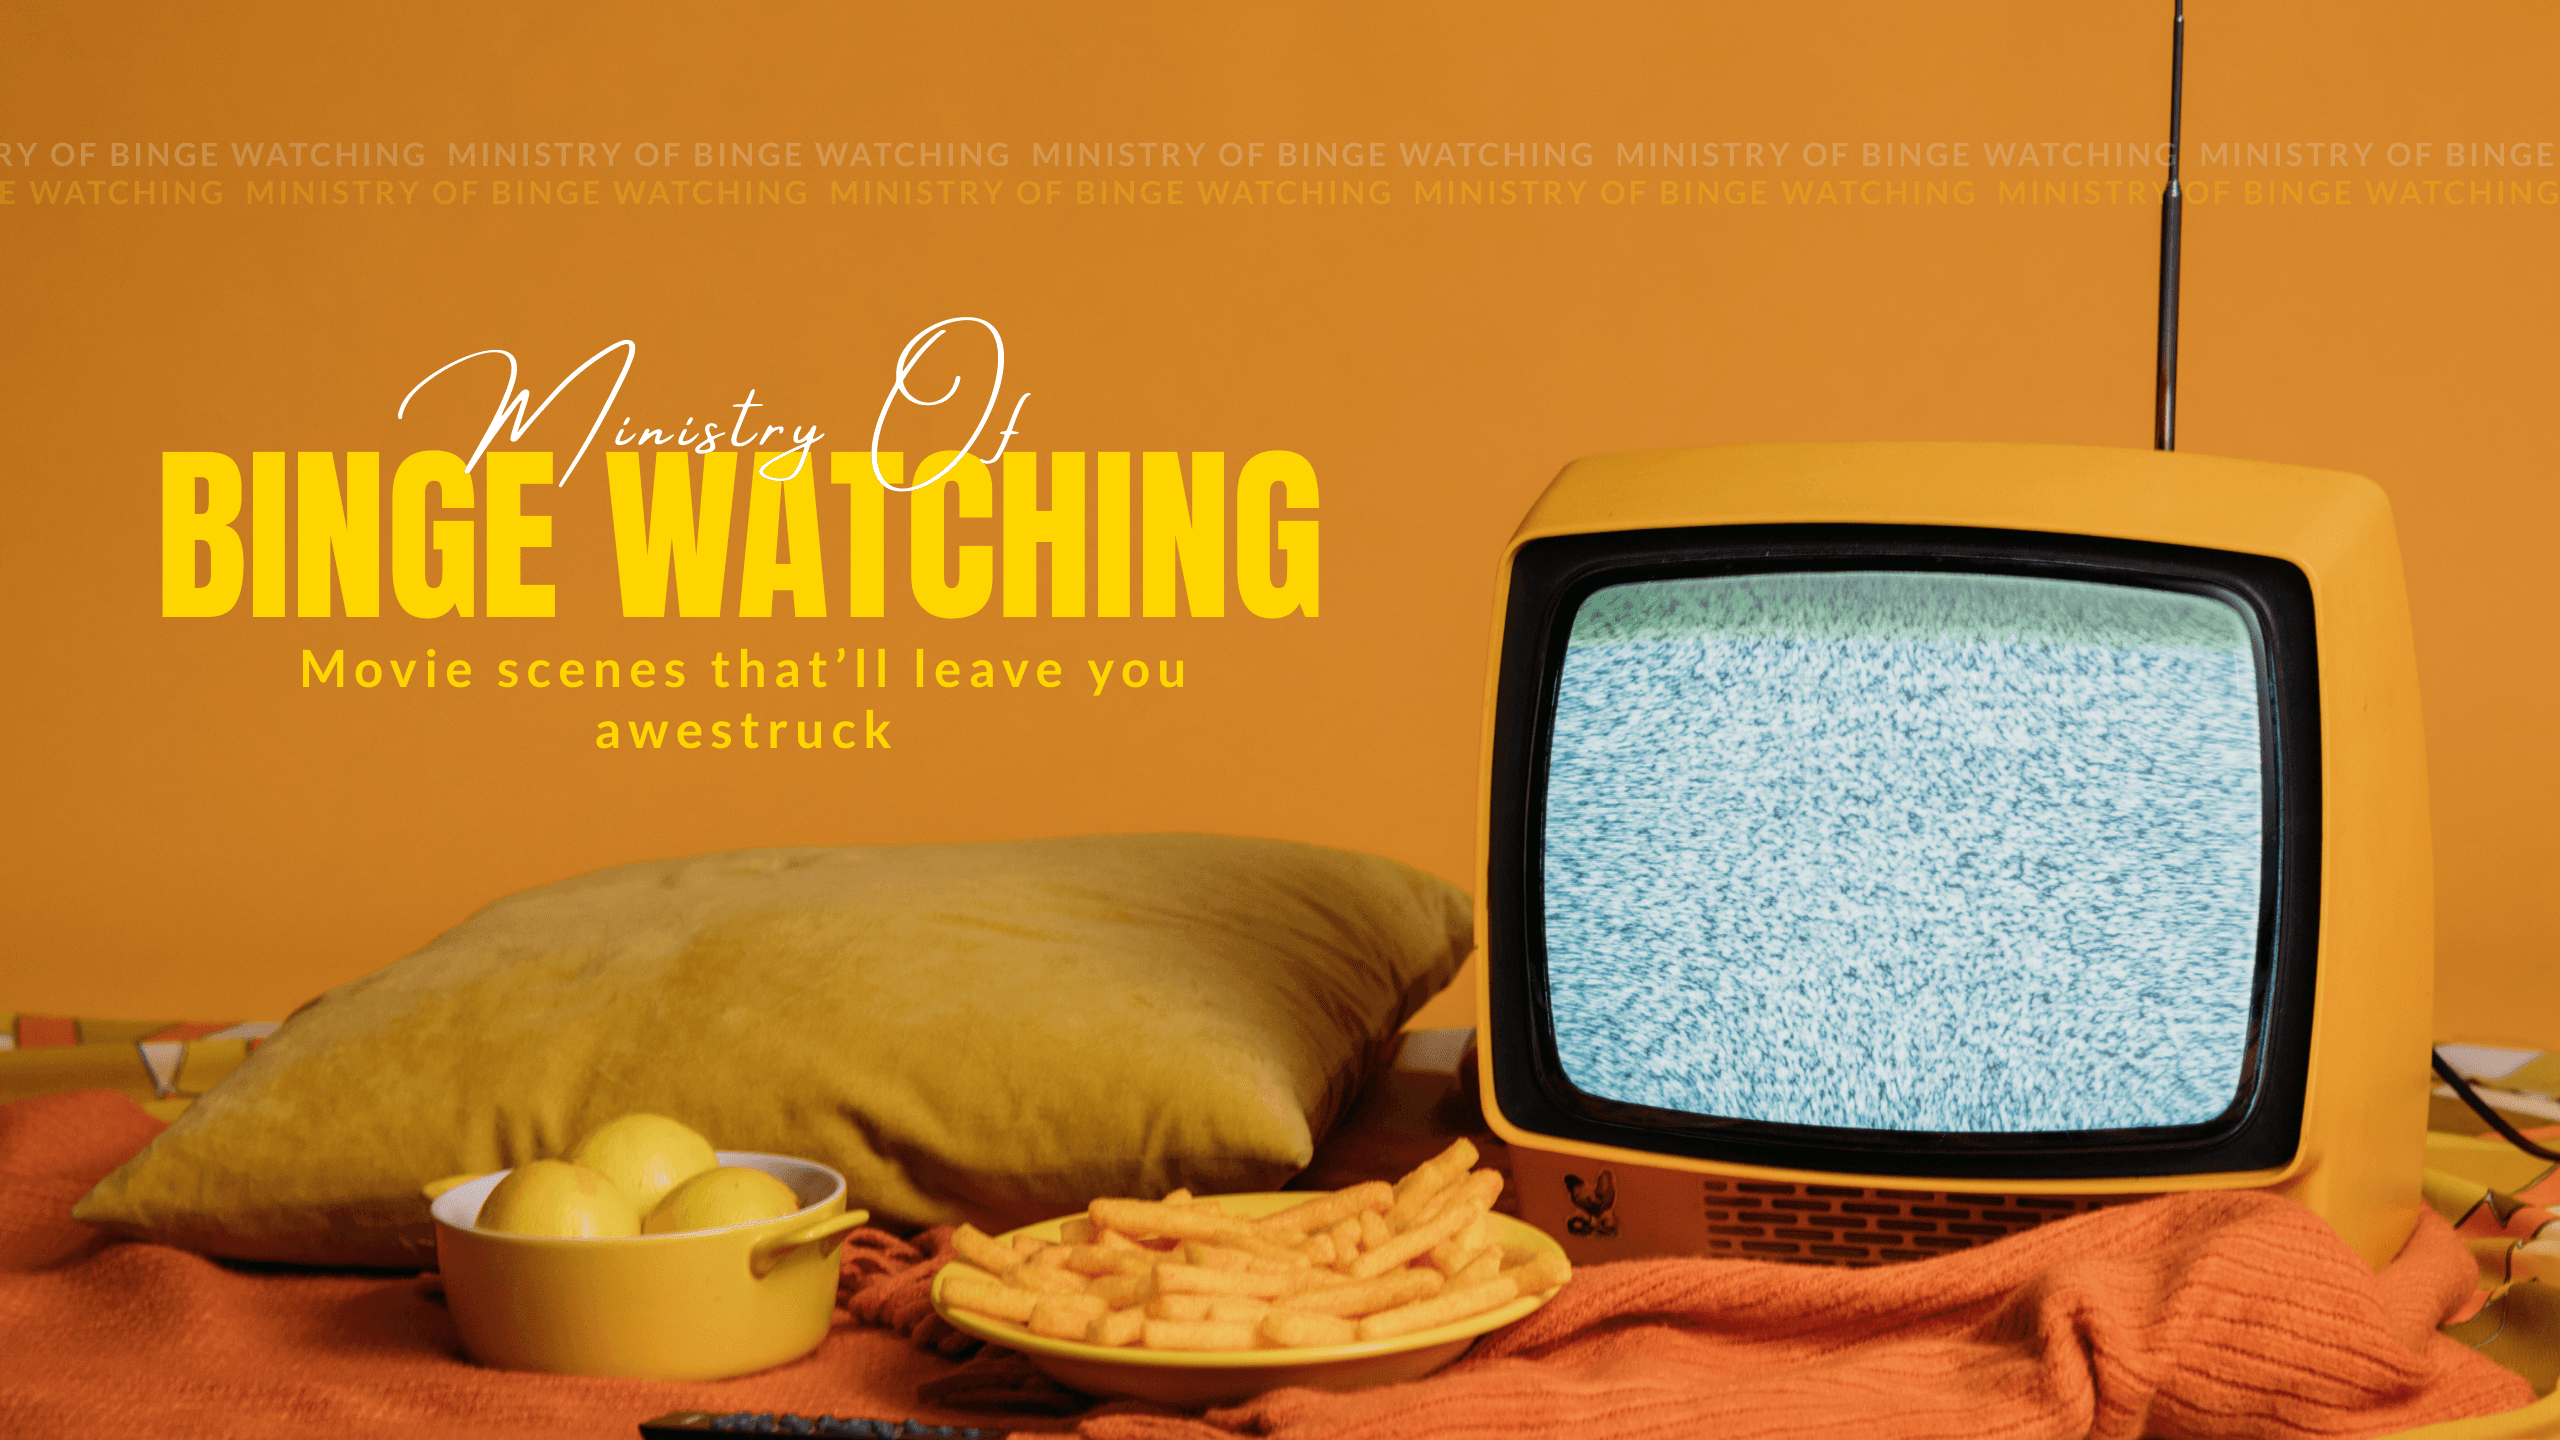 binge-watching-from-comfort-mattress-and-television-set-youtube-channel-art-thumbnail-img